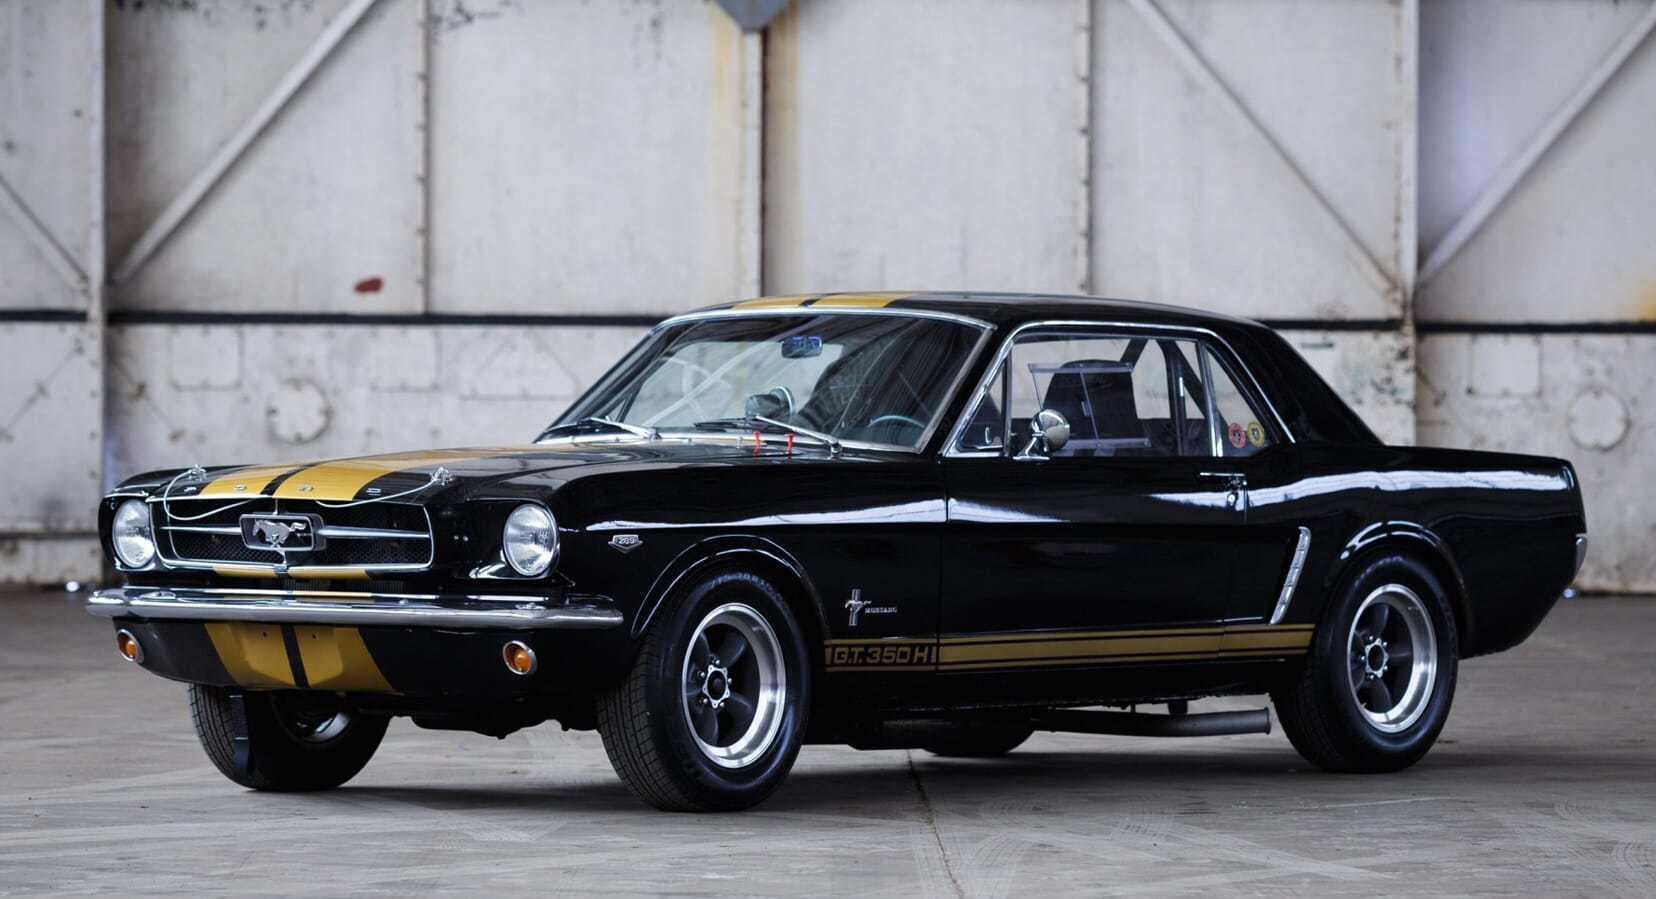 Classic Car Find of the Week: 1965 Ford Mustang HTP Race Car